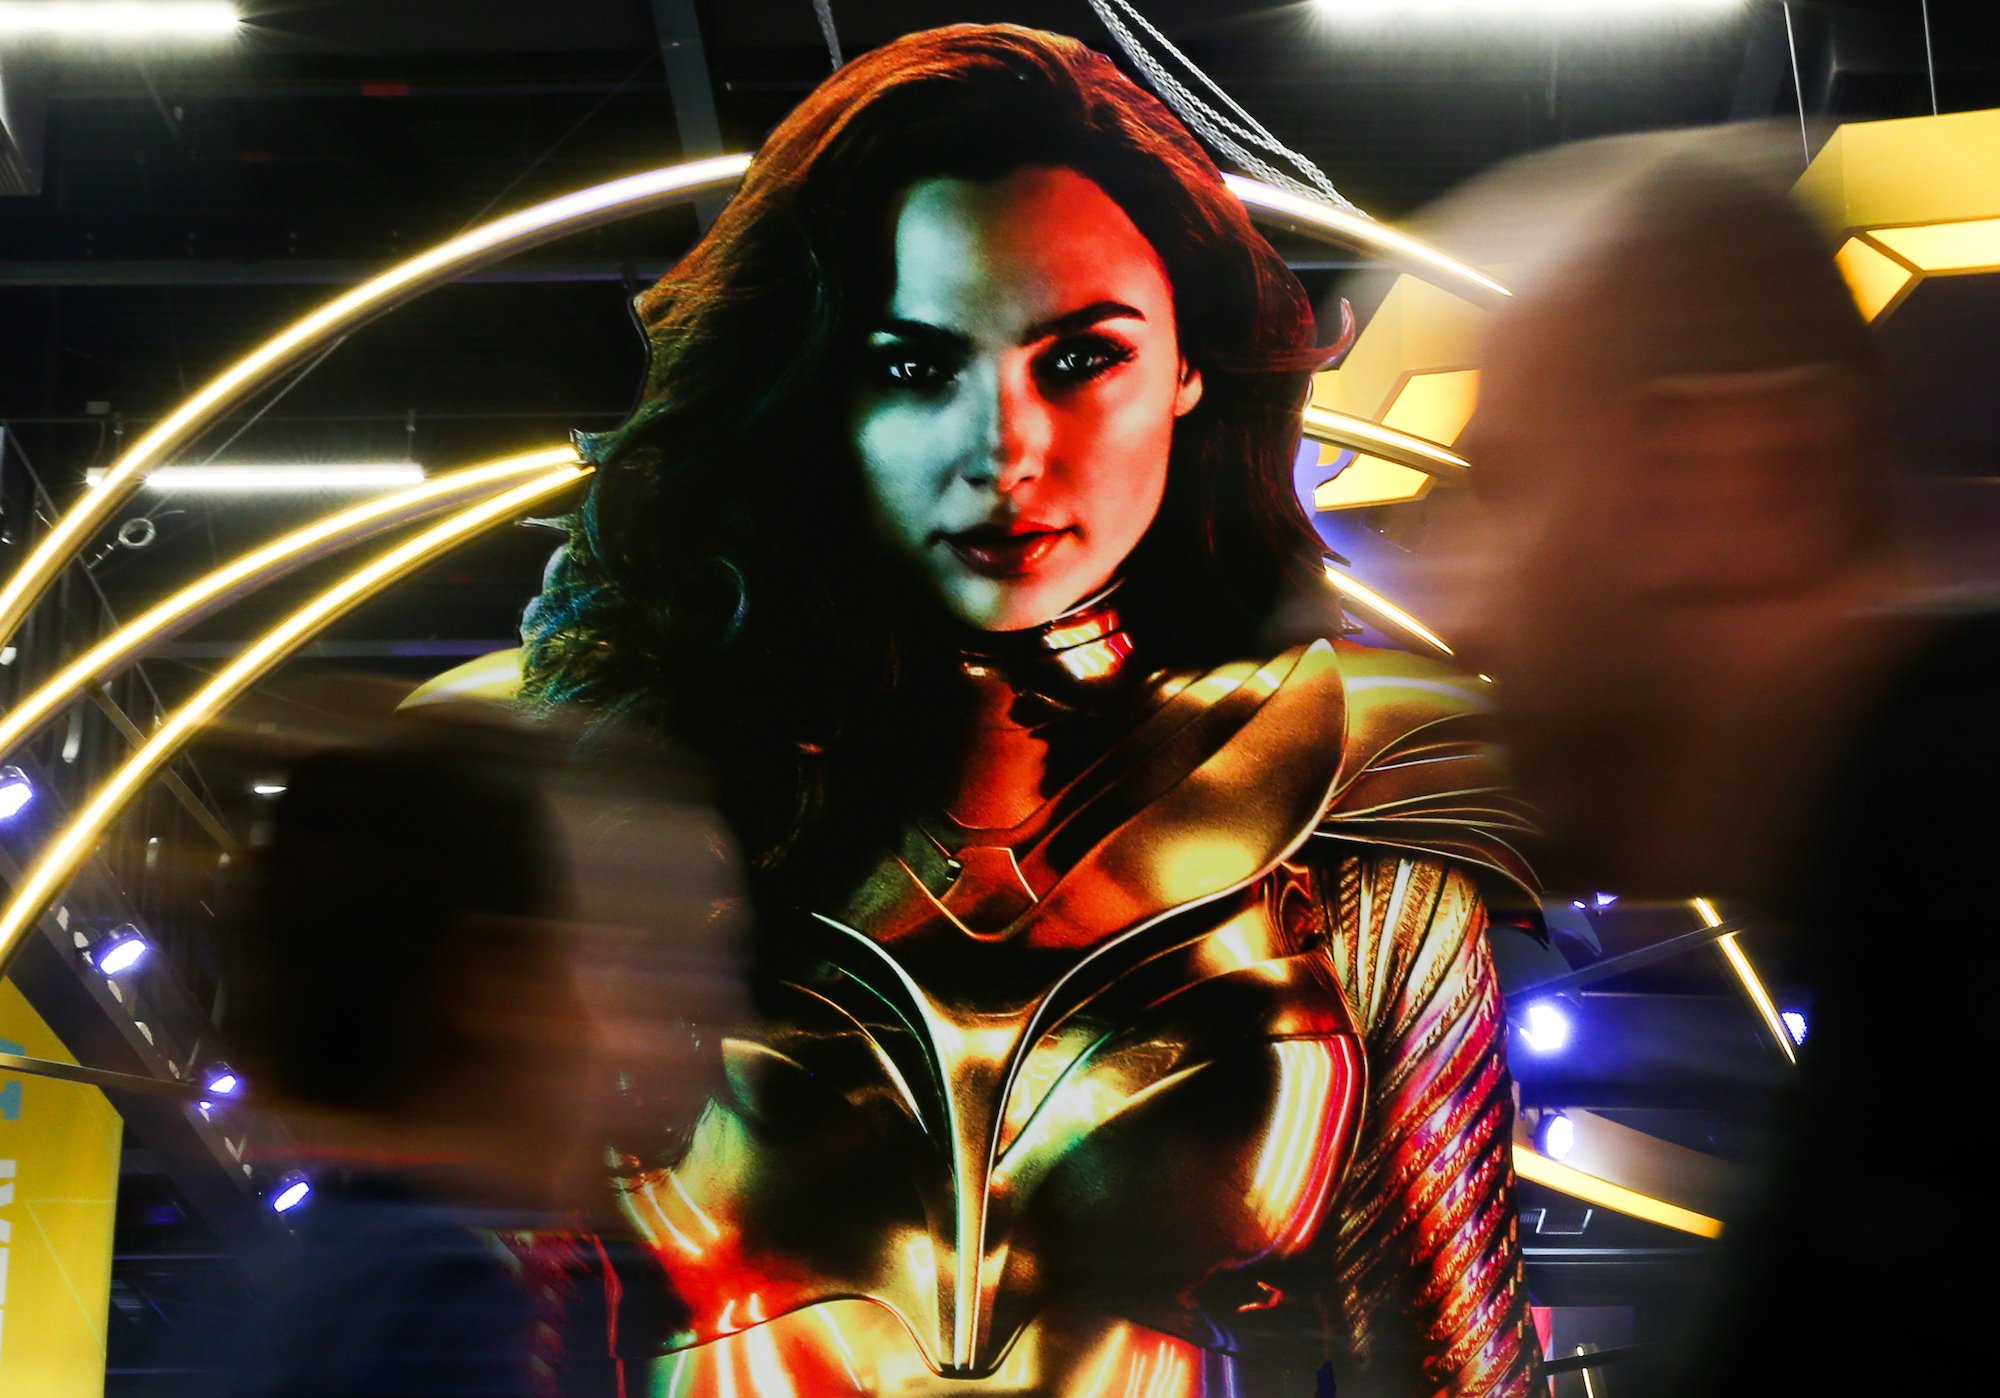 Wonder Woman backdrop with blurred people passing